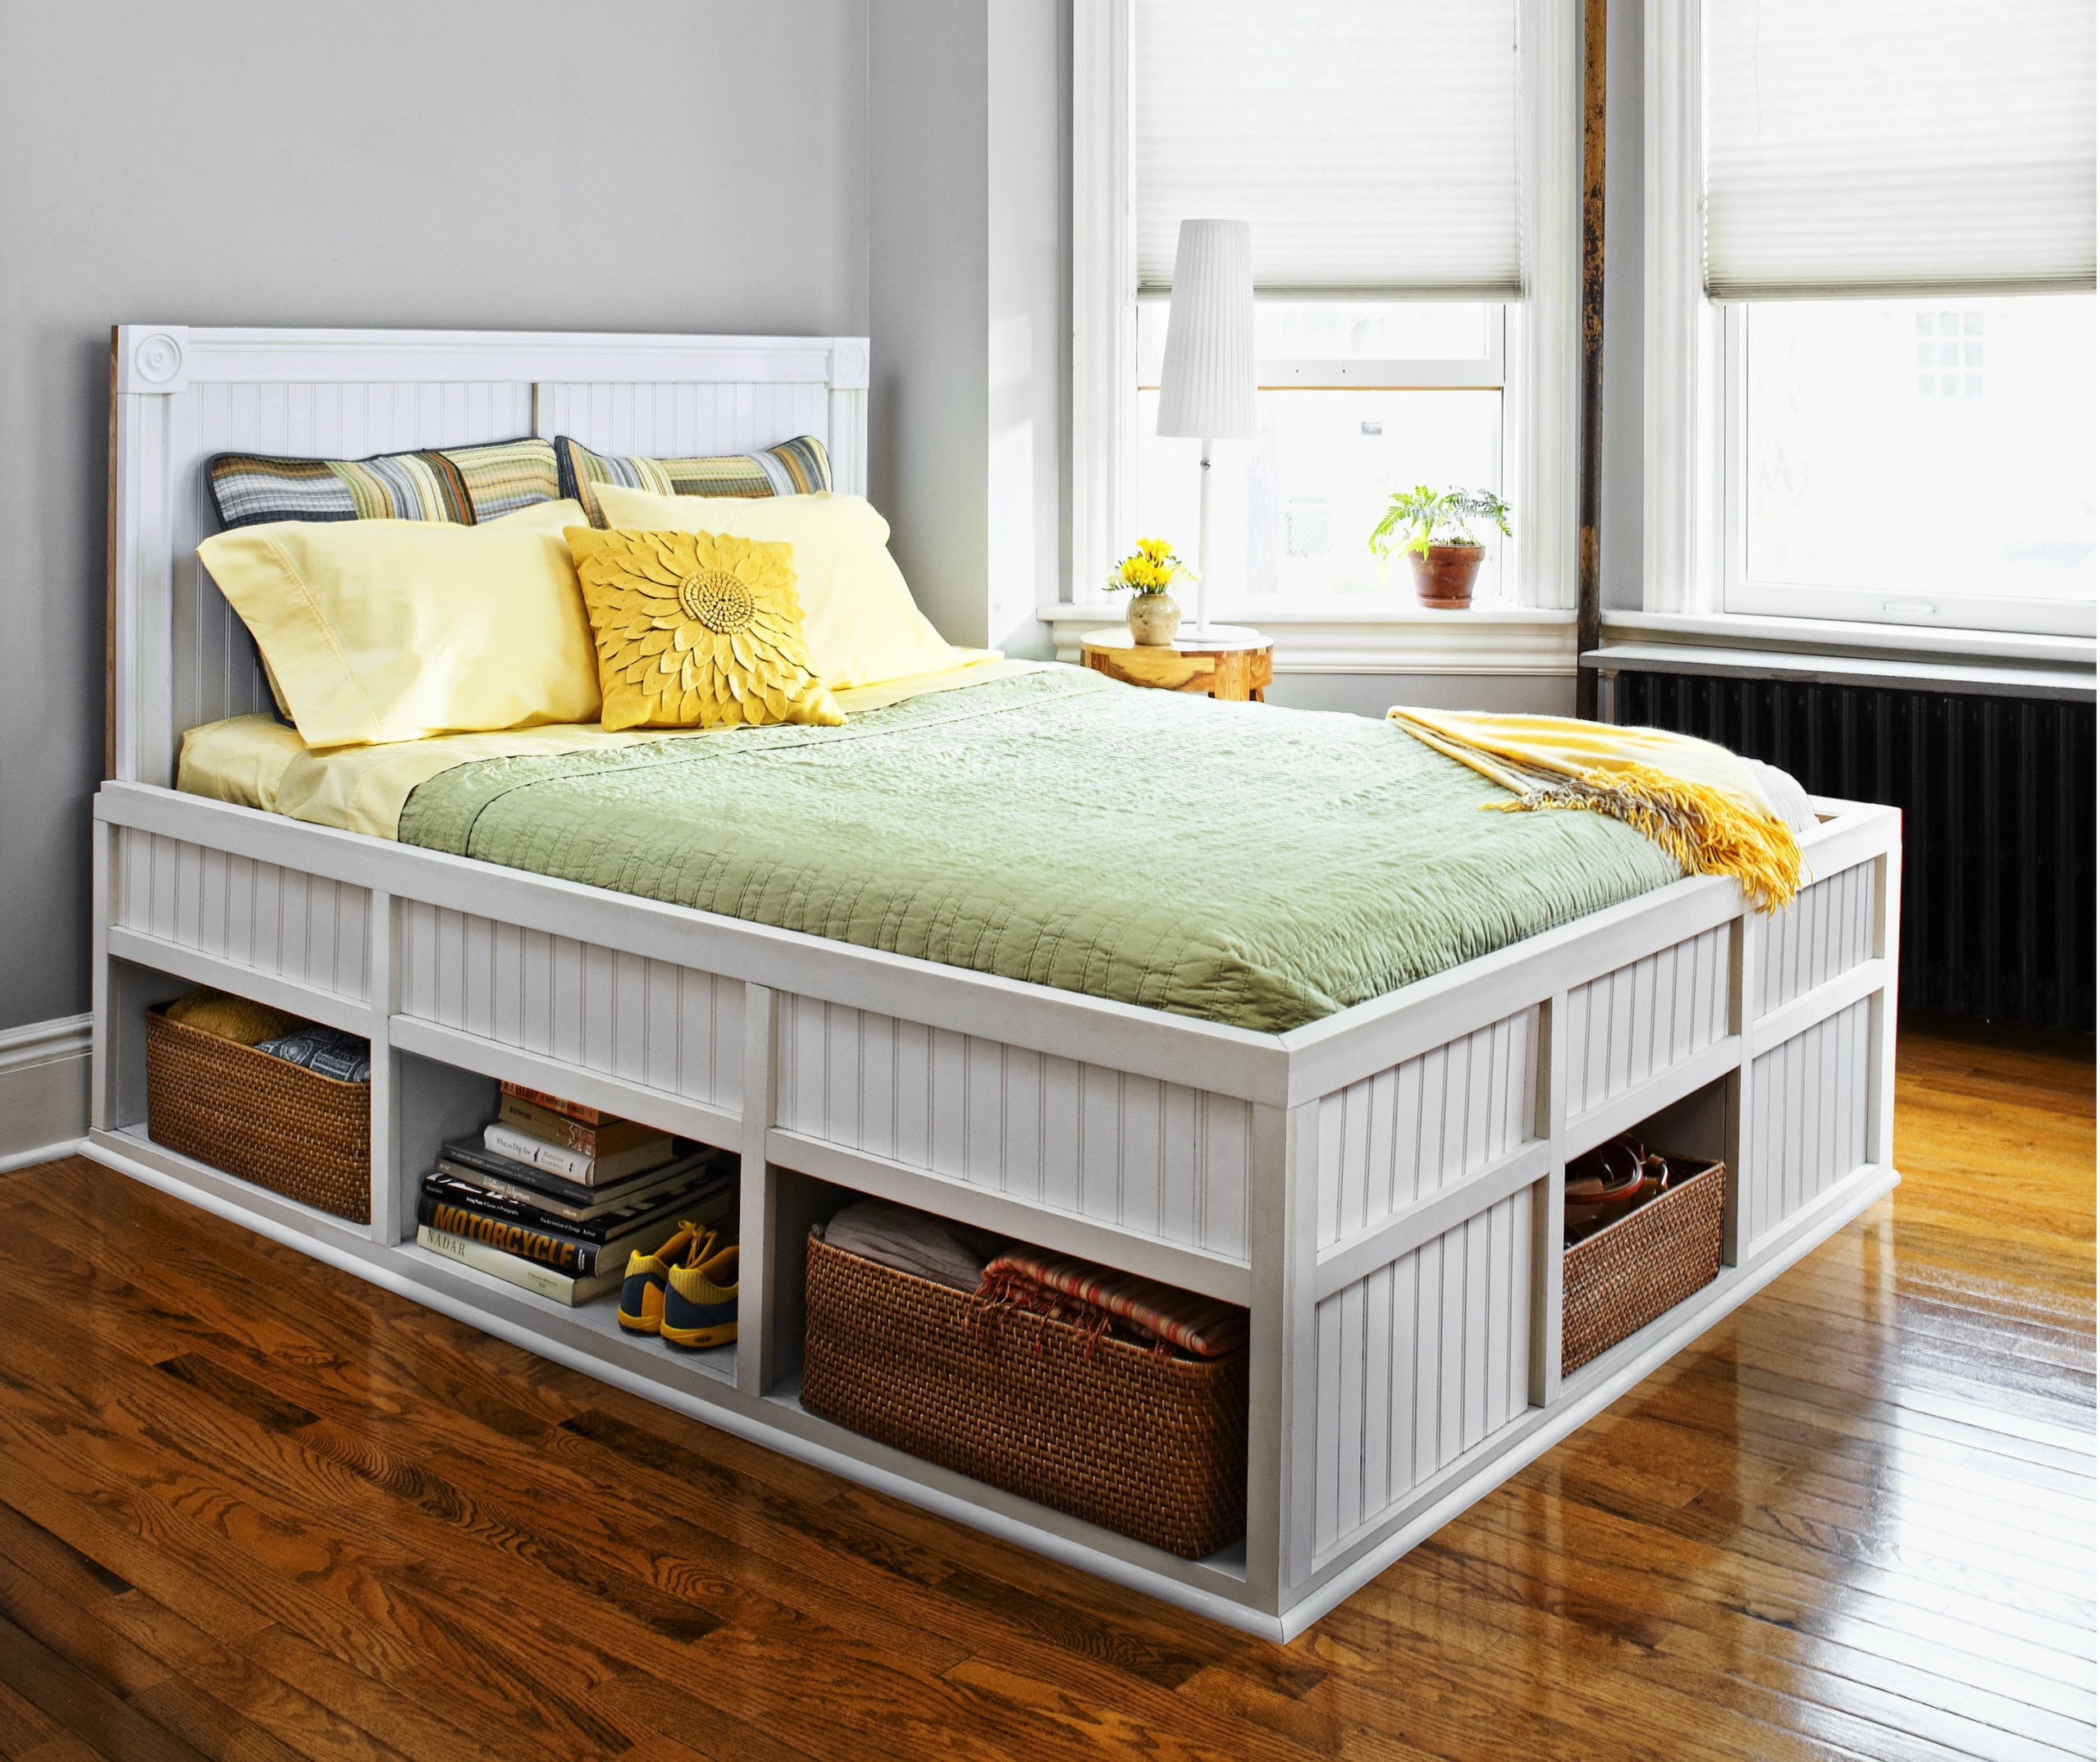 Bed With Storage Underneath Visualhunt, Full Bed Frame With Storage Underneath